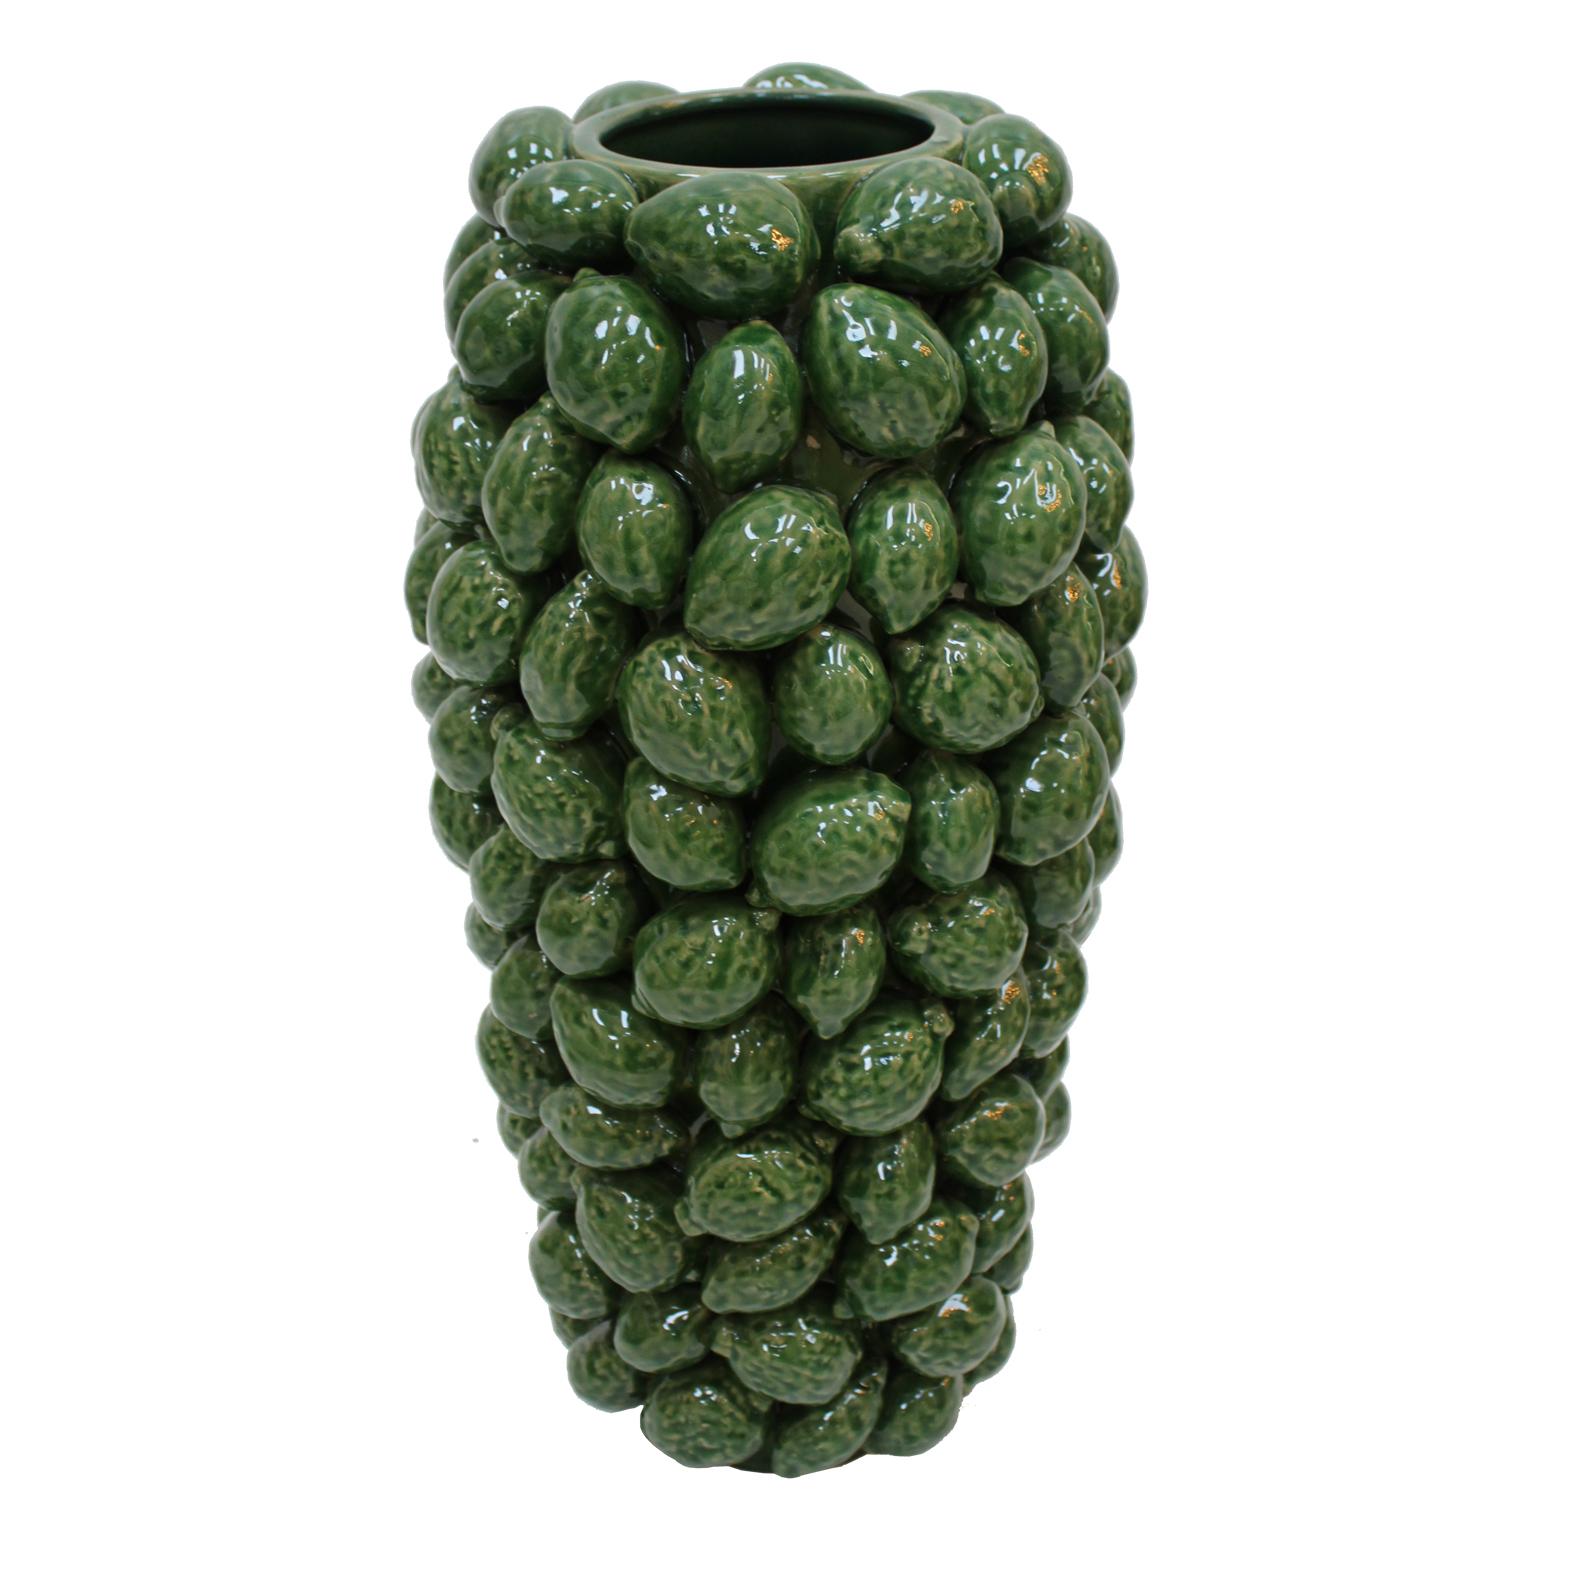 Vase made by hand in glazed green ceramic with traditional lemon motifs from southern Italy.

Every item LA Studio offers is checked by our team of 10 craftsmen in our in-house workshop. Special restoration or reupholstery requests can be done.